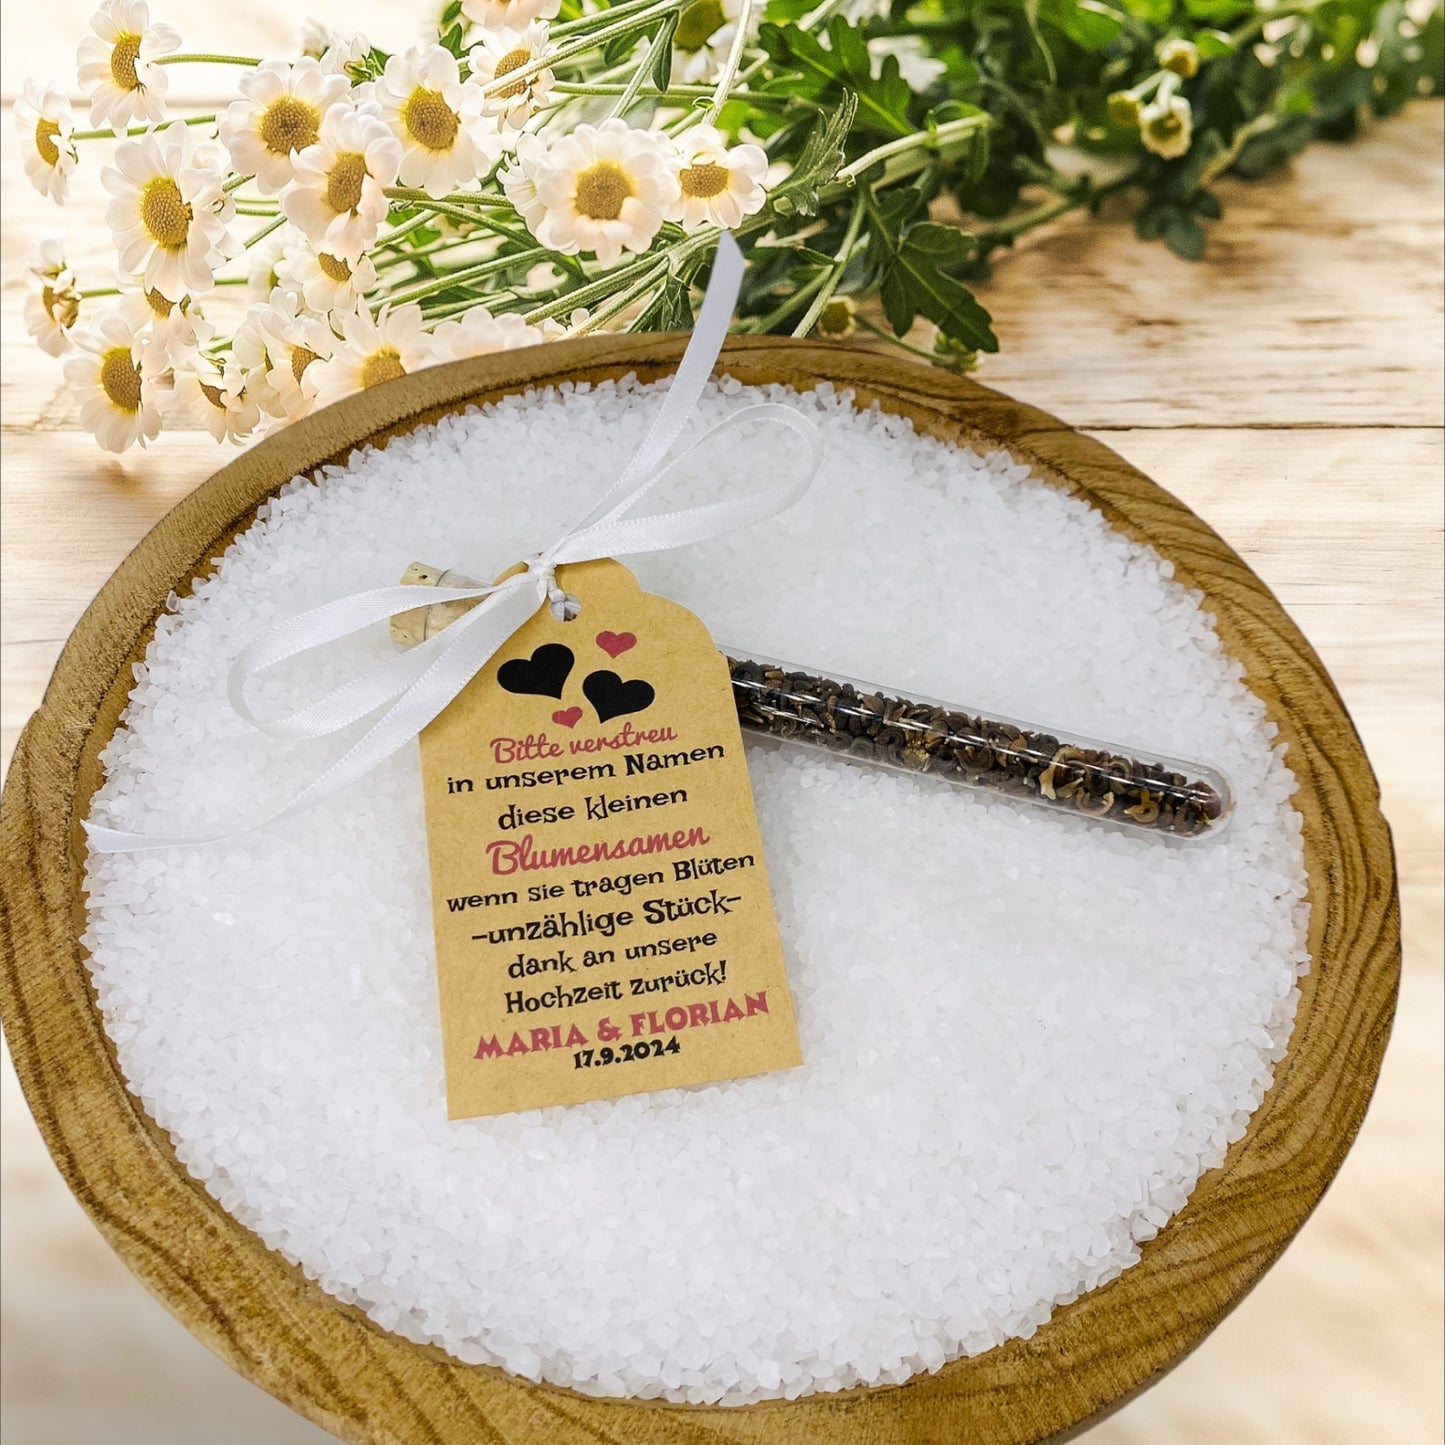 Blooming seeds in a test tube: Personalized guest gift for unforgettable moments *HEARTS*